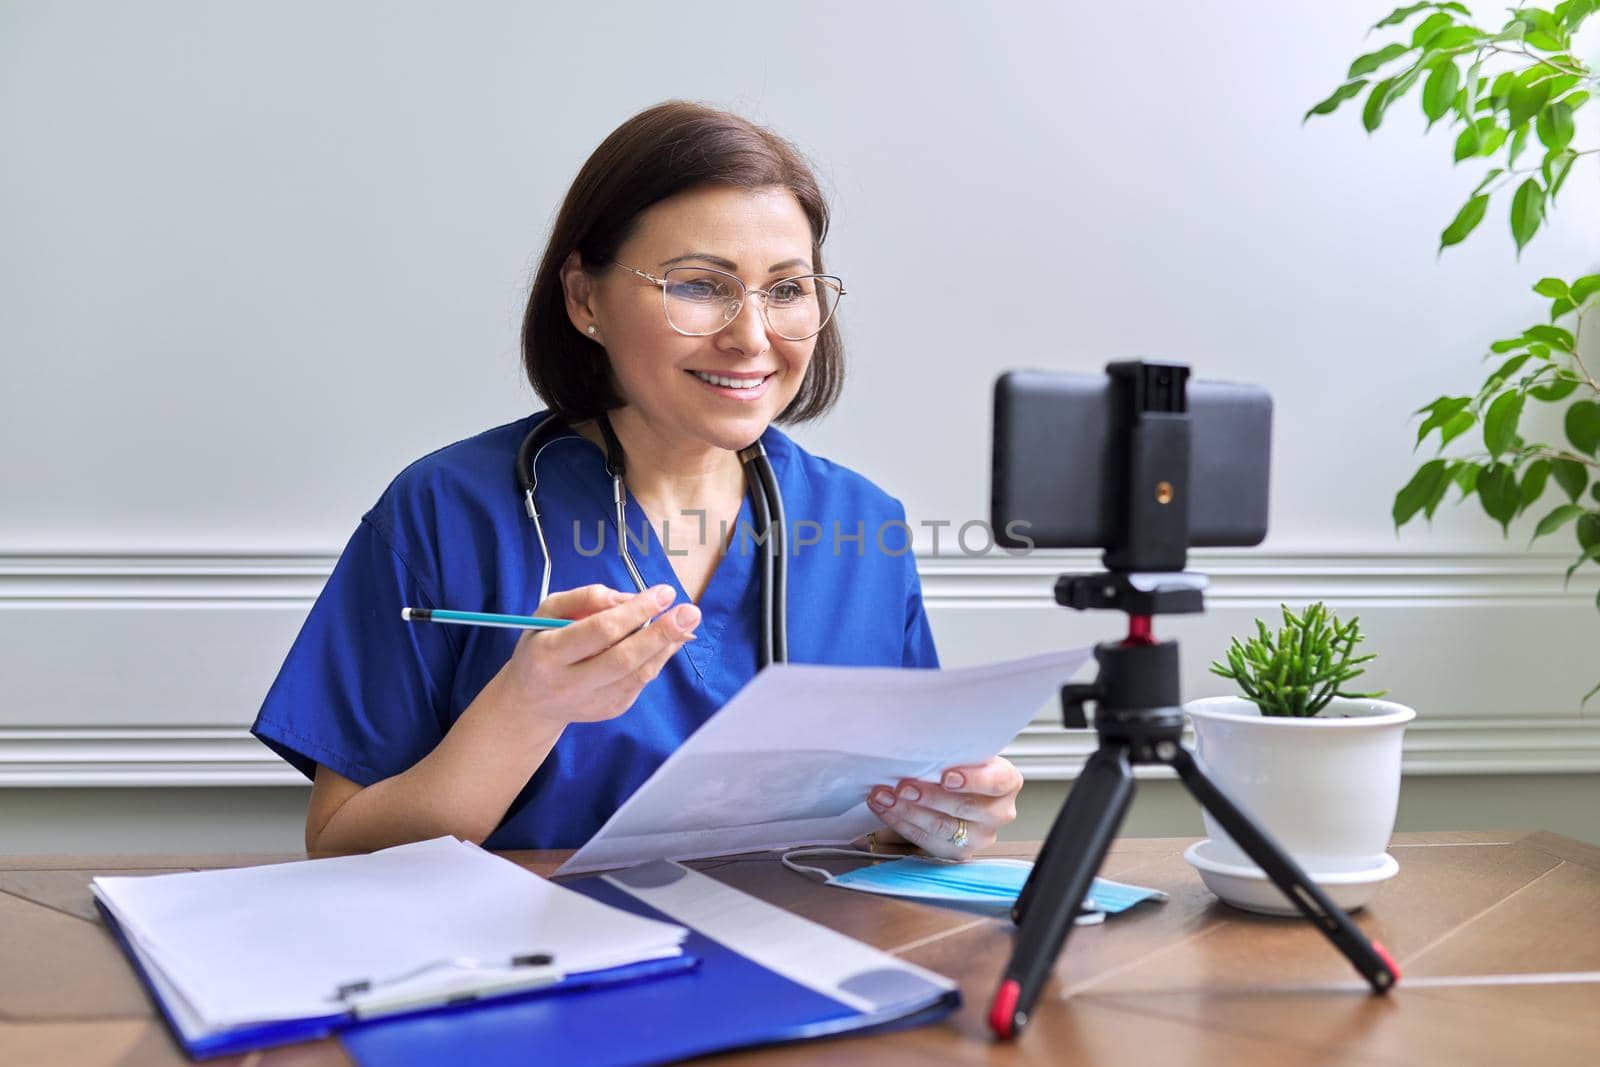 Online doctor consultation, female specialist talking with patient using video call, smartphone on tripod, doctor with stethoscope looking at the phone's webcam